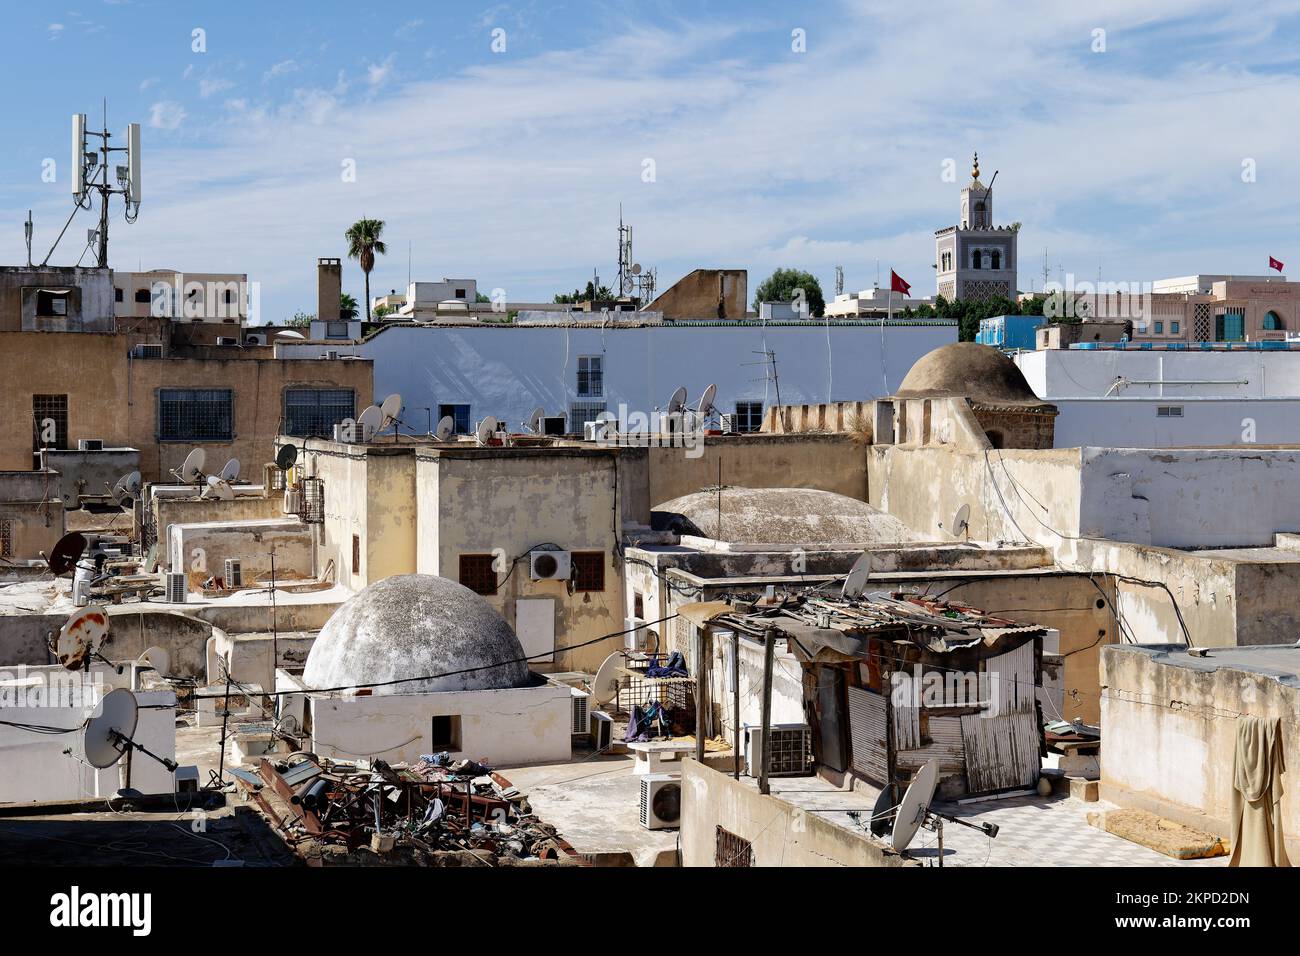 View of the Old Medina of Tunis, Unesco. Around 700 monuments, including palaces, mosques, mausoleums testify to this remarkable historic city. Stock Photo